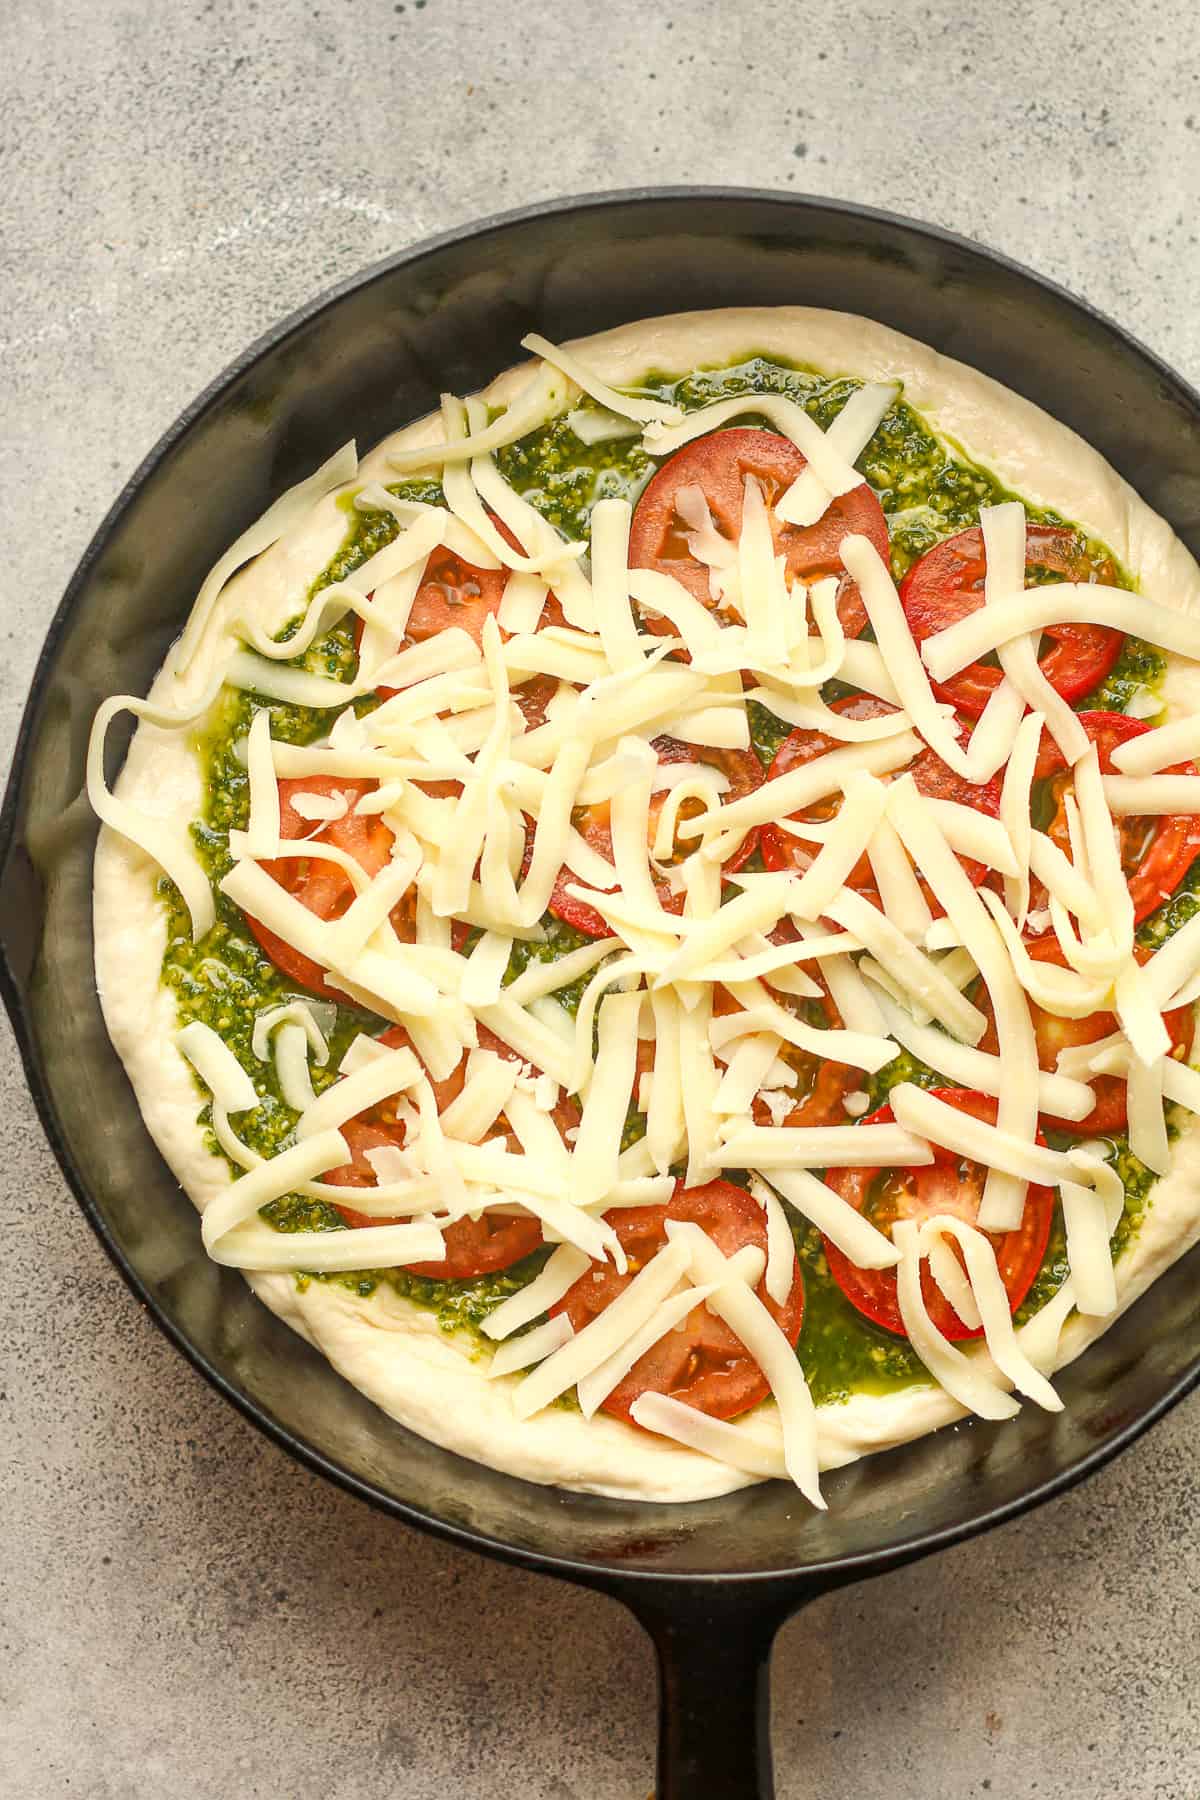 A skillet of the pesto pizza before baking.